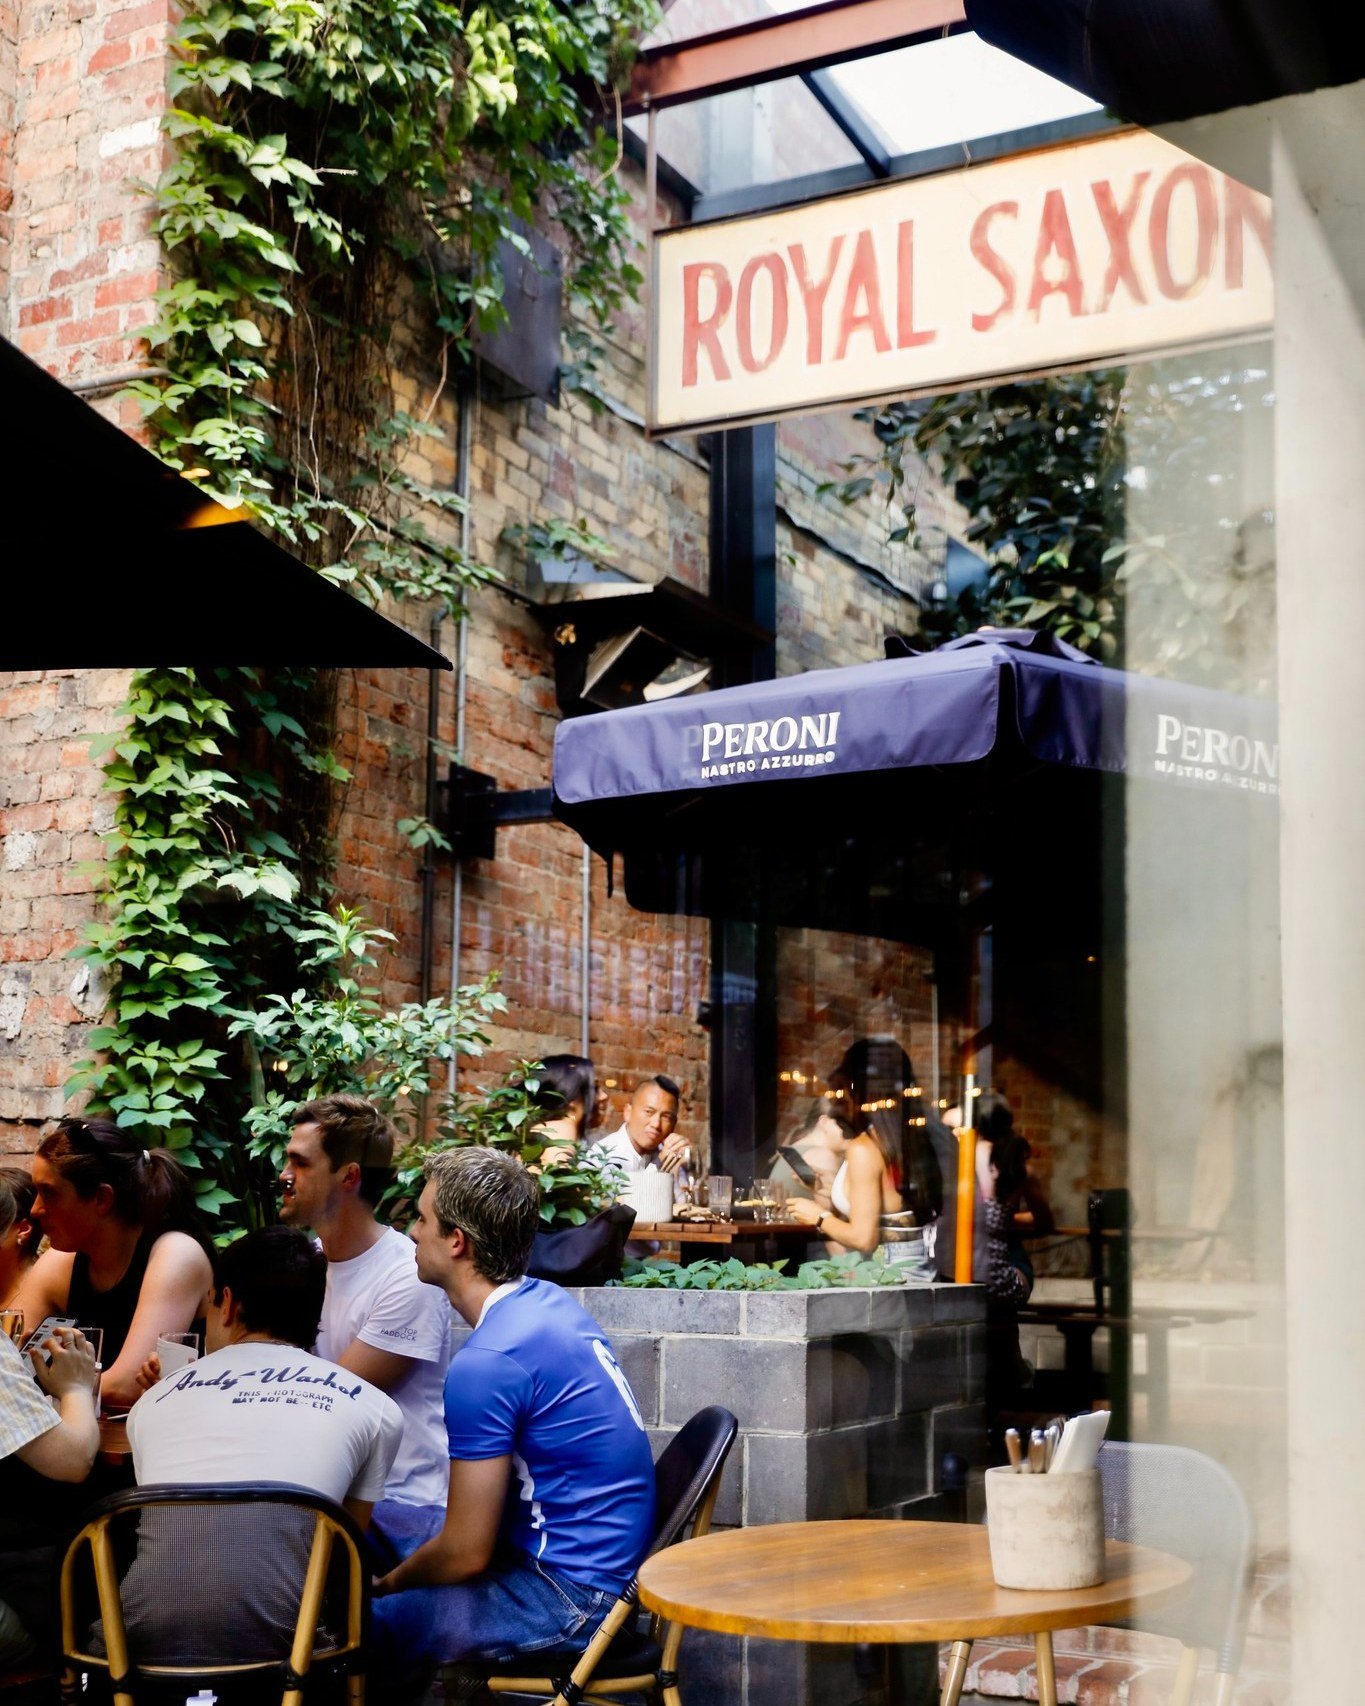 It's a glorious Melbourne afternoon - join us for Happy Hour from 3-6pm, then stay on for our $20 Pasta &amp; Pinot night!
.
.
.
.
.
#royalsaxon #melbournepub #melbournepubs #melbourne #richmond3121 #richmondlife #thehappiesthour #happyhour #melbourn